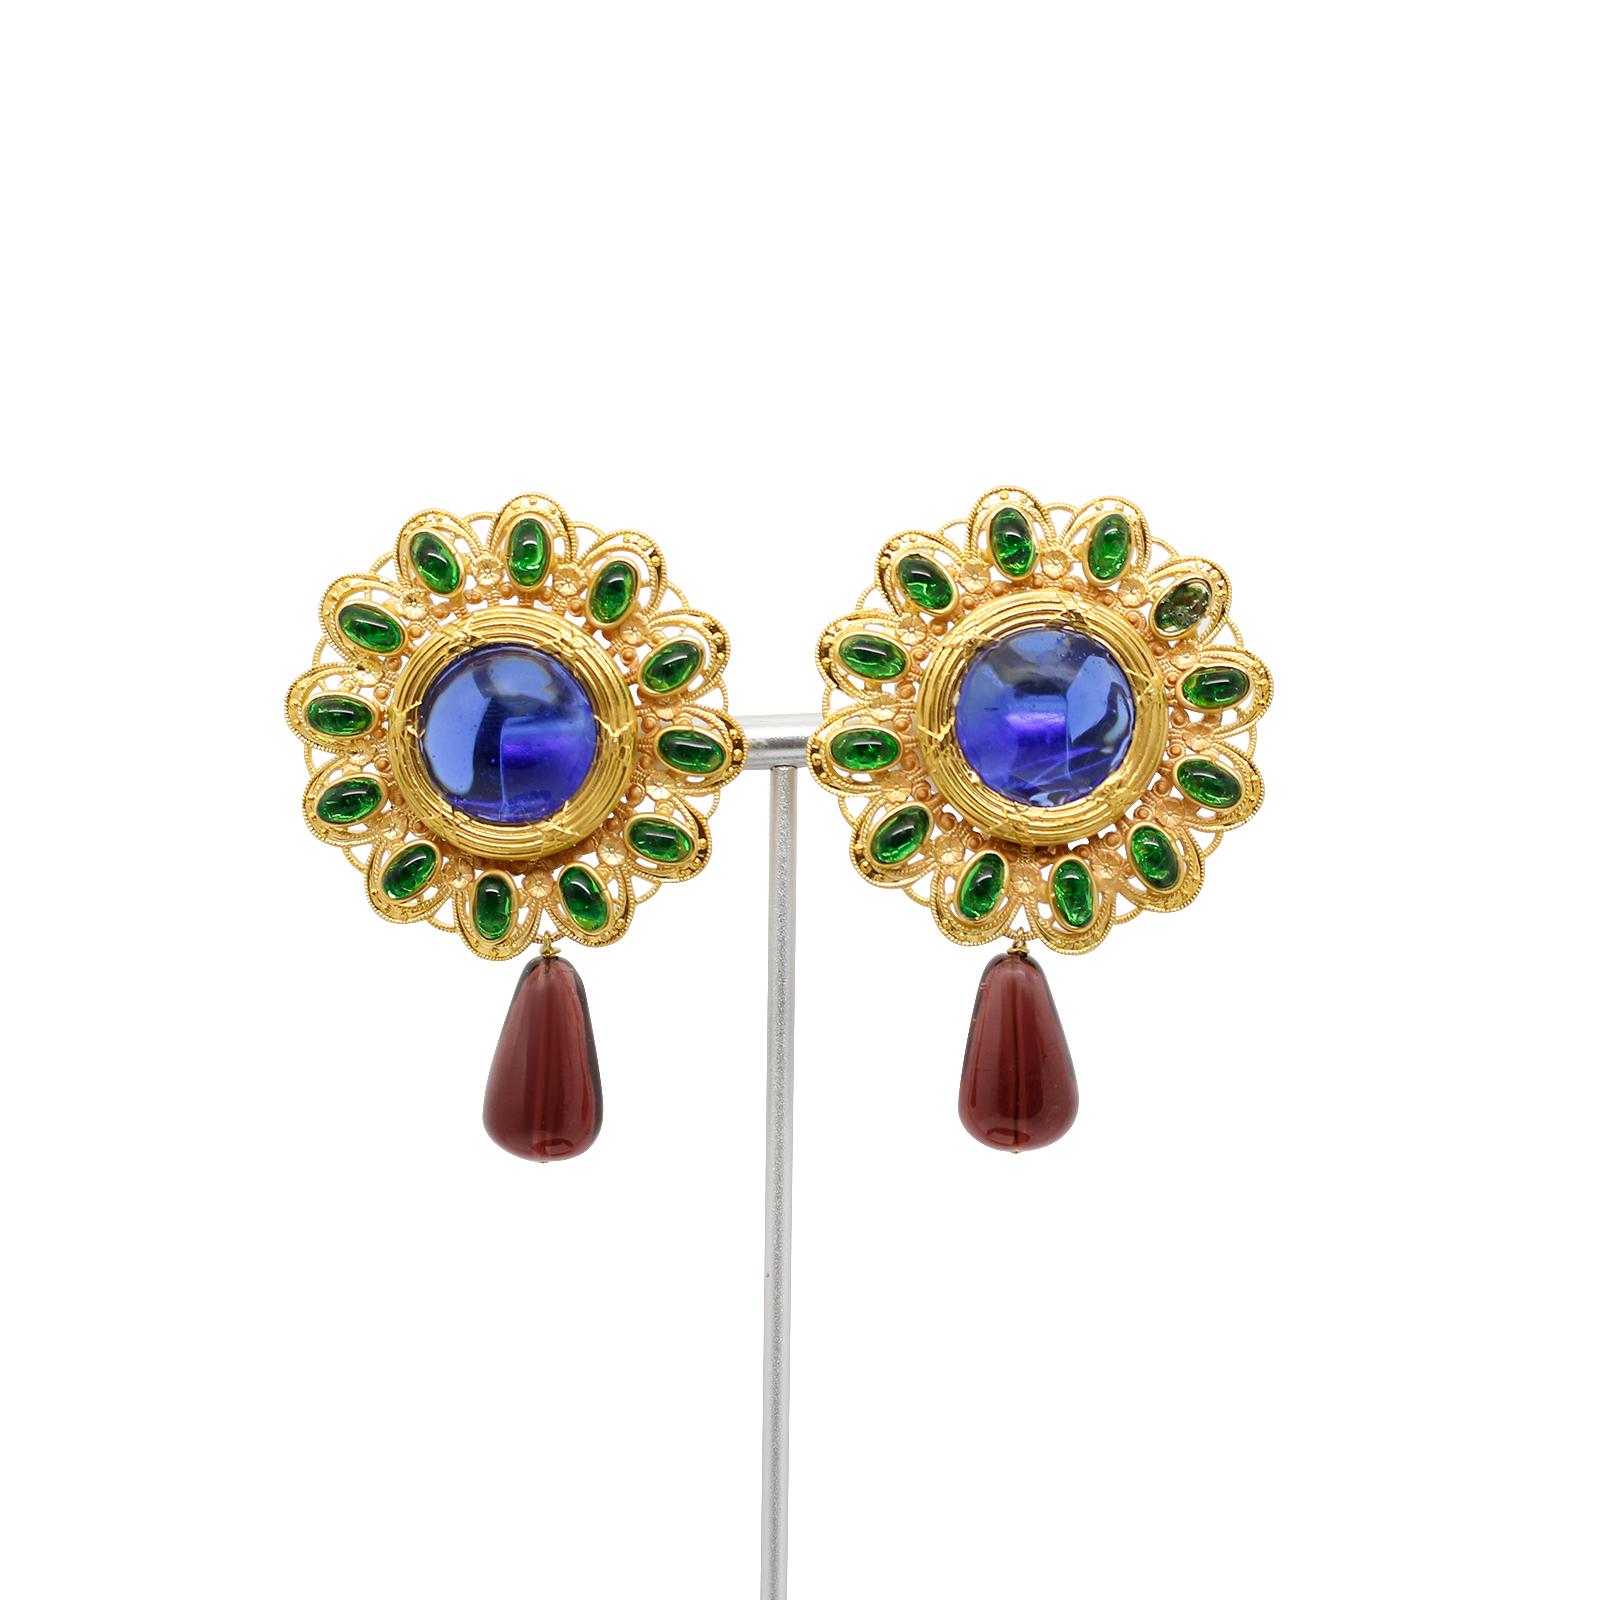 Maison Gripoix Vintage Blue, Green and Red Dangling Earrings Circa 1980s In Excellent Condition For Sale In New York, NY